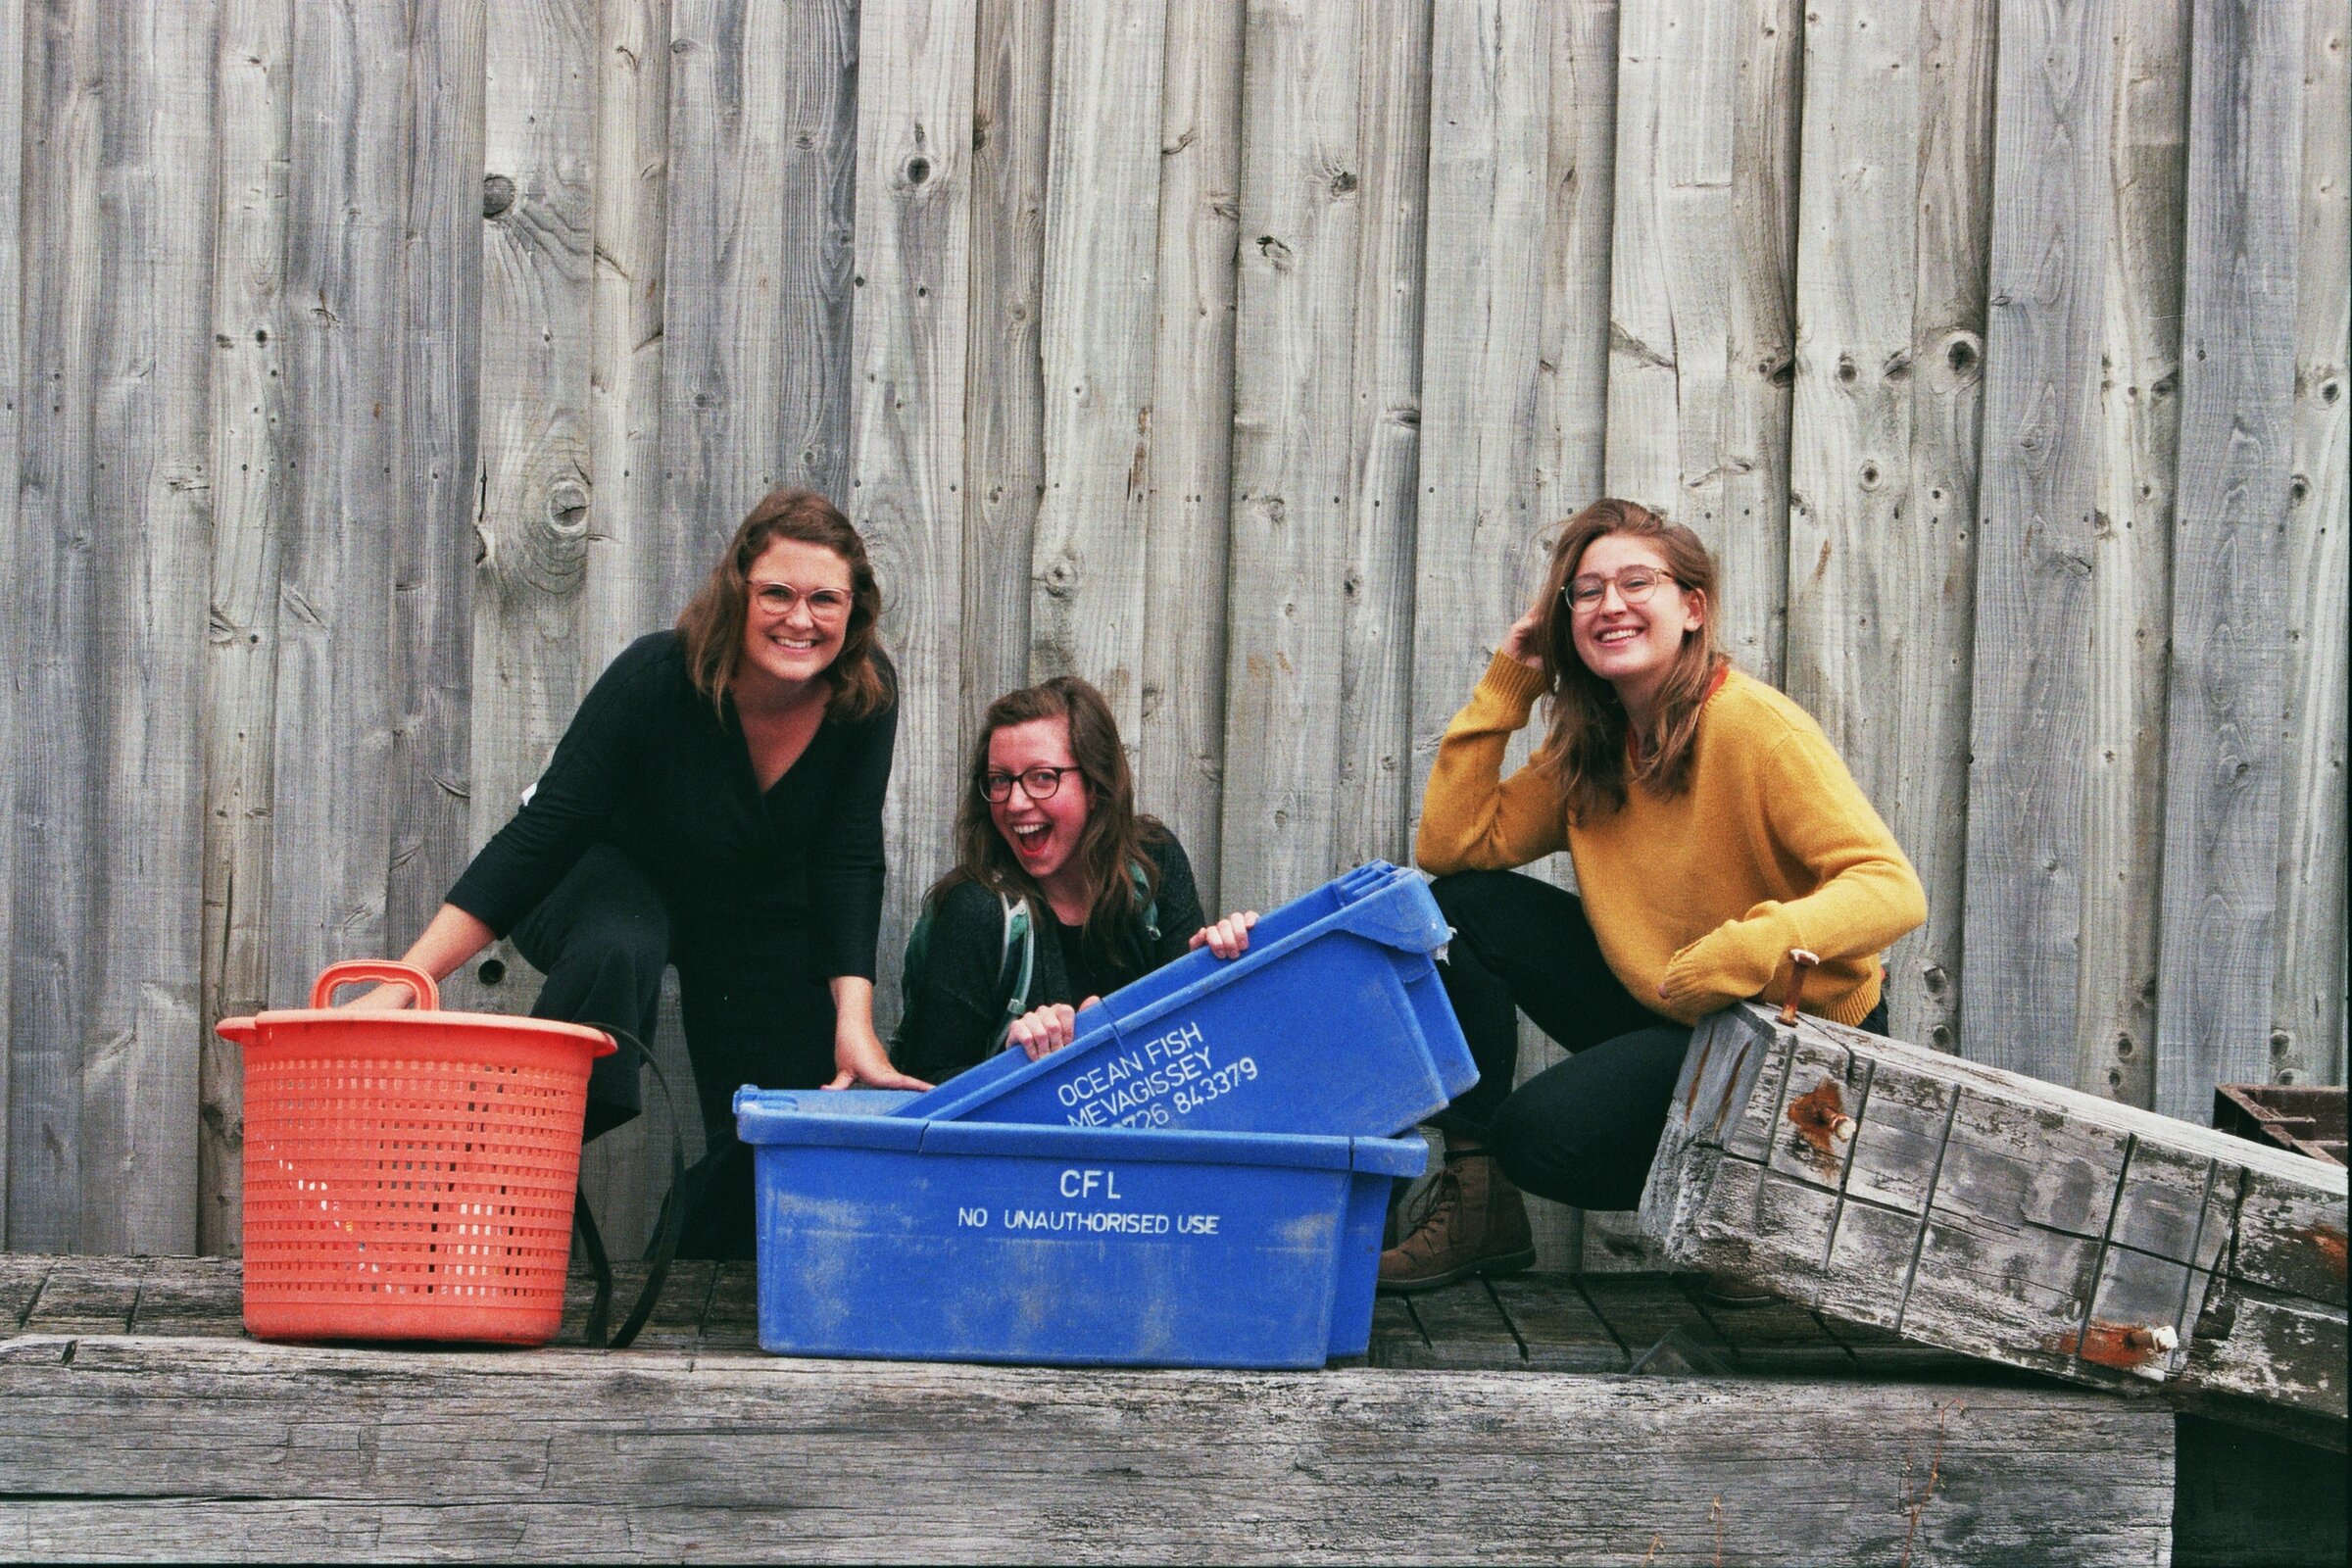 MWC’s Harriet (Project Manager), Sara (Policy Projects Manager), and Sophie (outgoing Communications Intern) having some fun in Newlyn, Cornwall. 📷: Noa Leach.